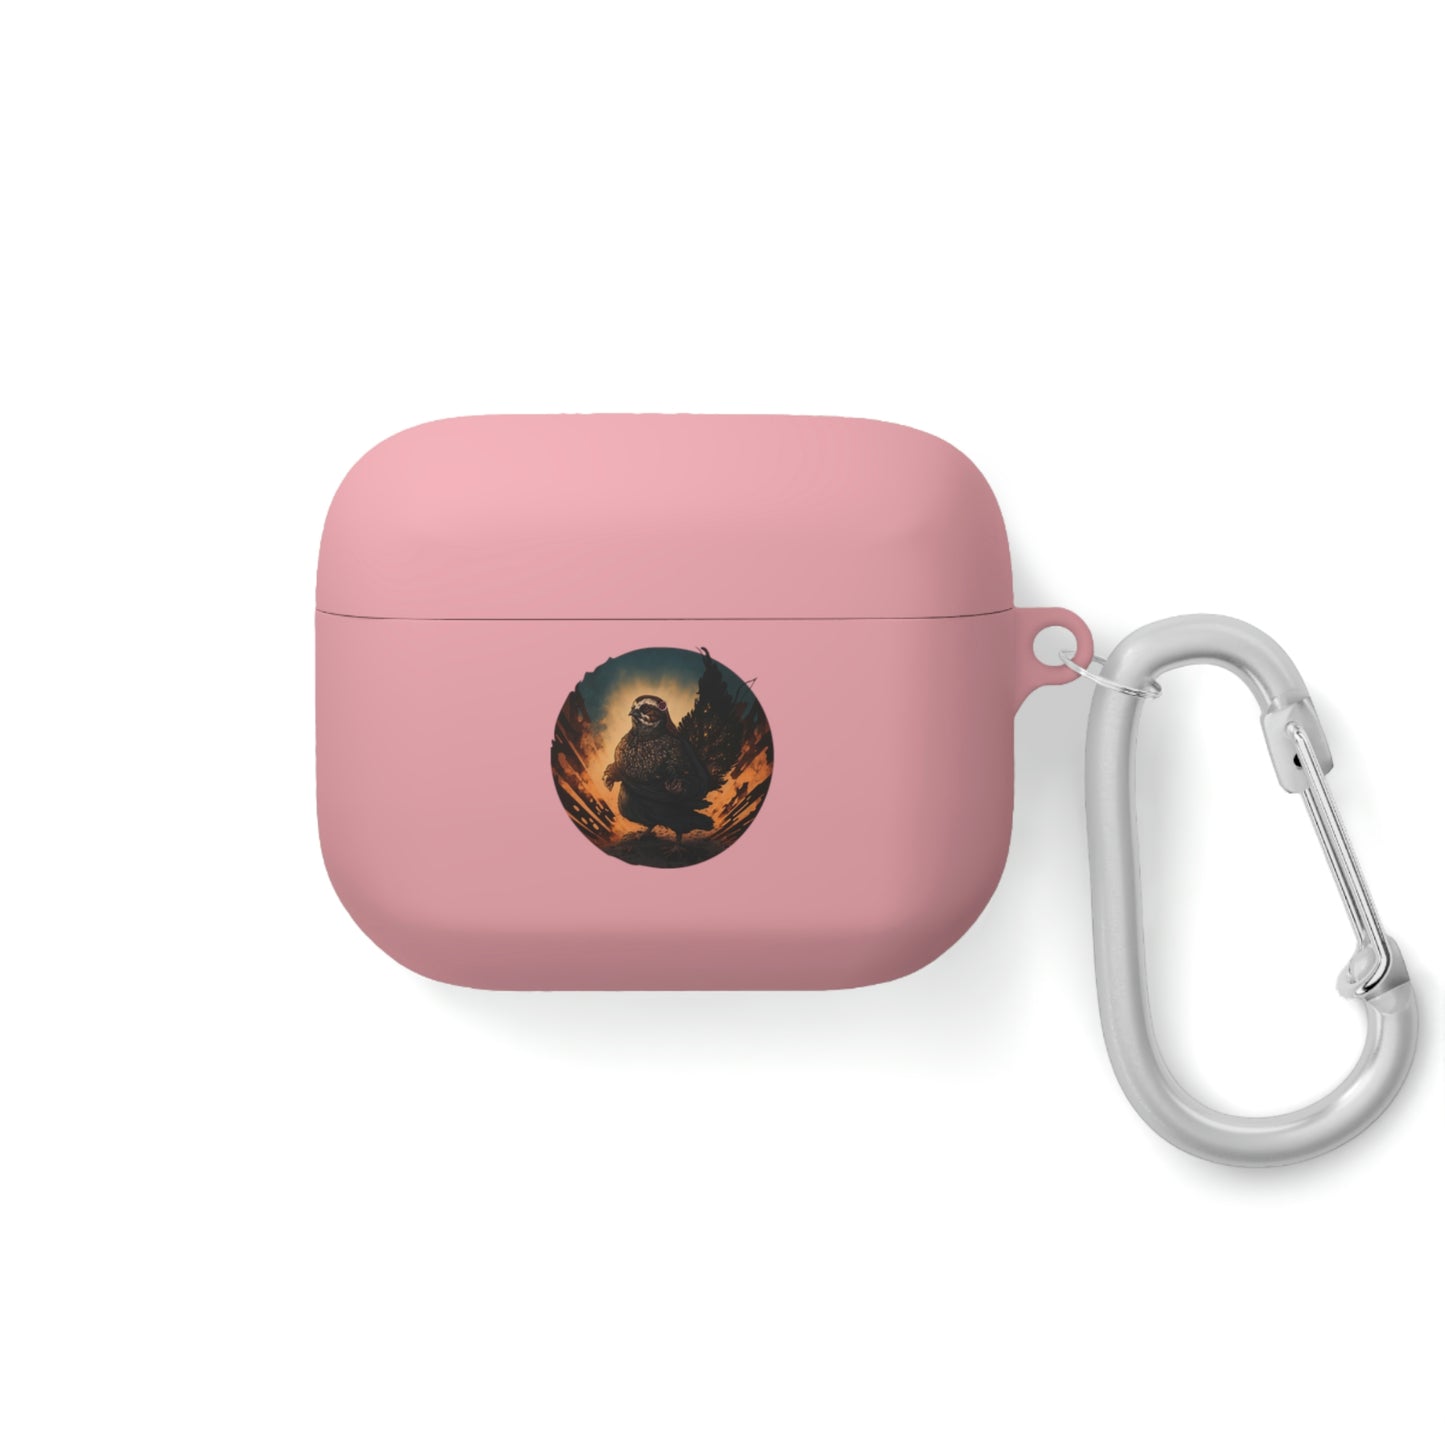 AirPods and AirPods Pro Case Cover - Quail and Metal: The Unlikely Union